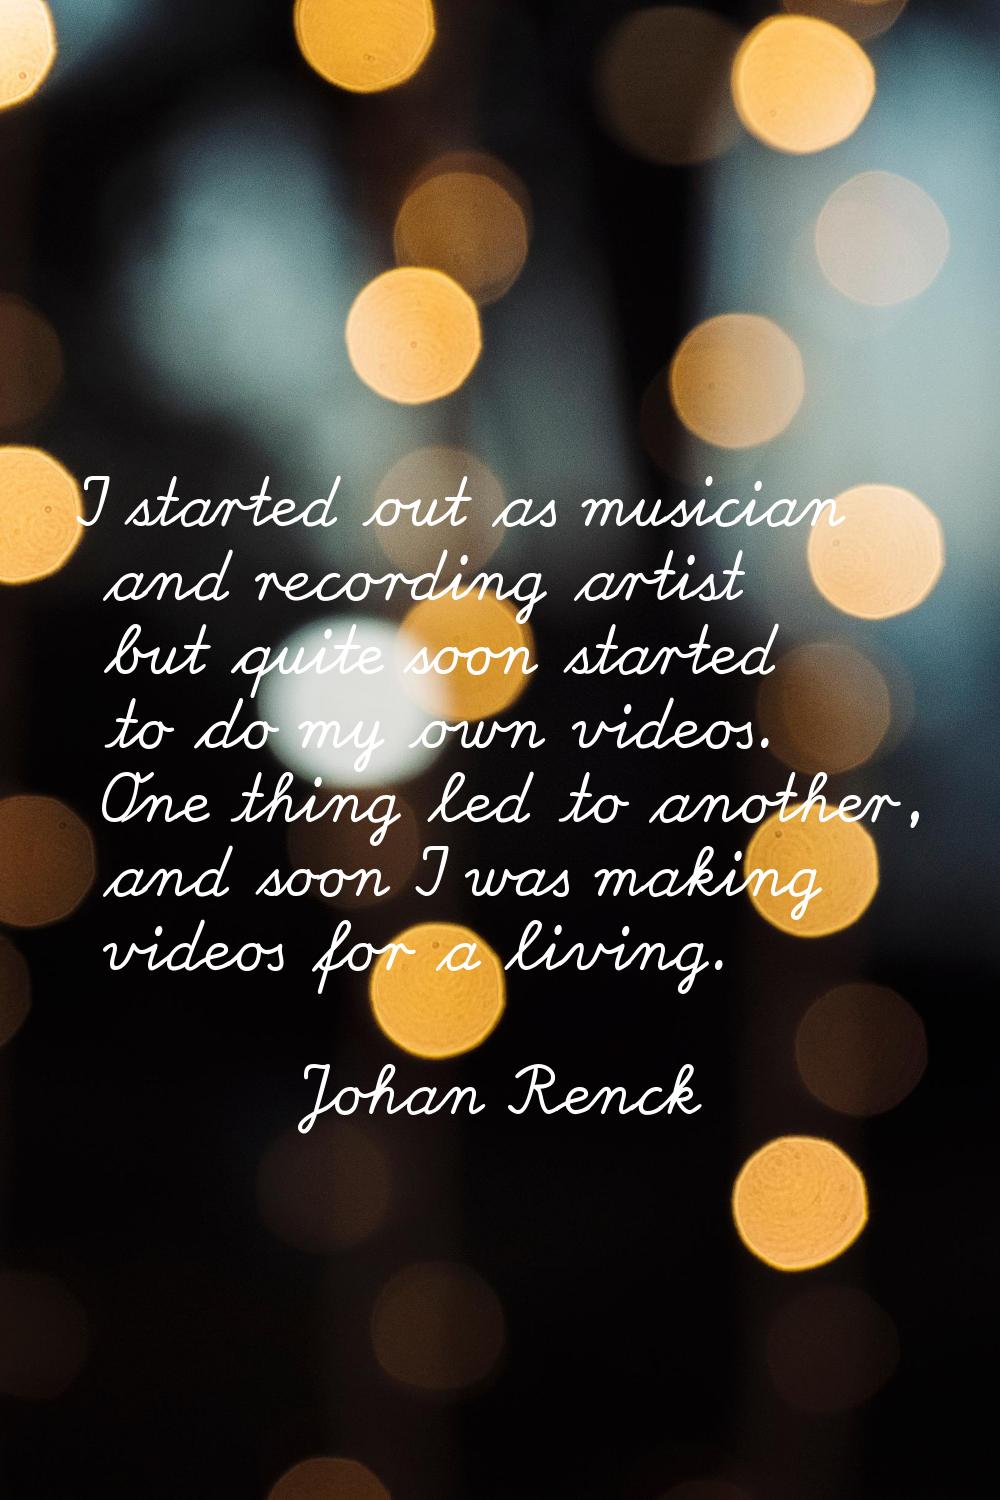 I started out as musician and recording artist but quite soon started to do my own videos. One thin